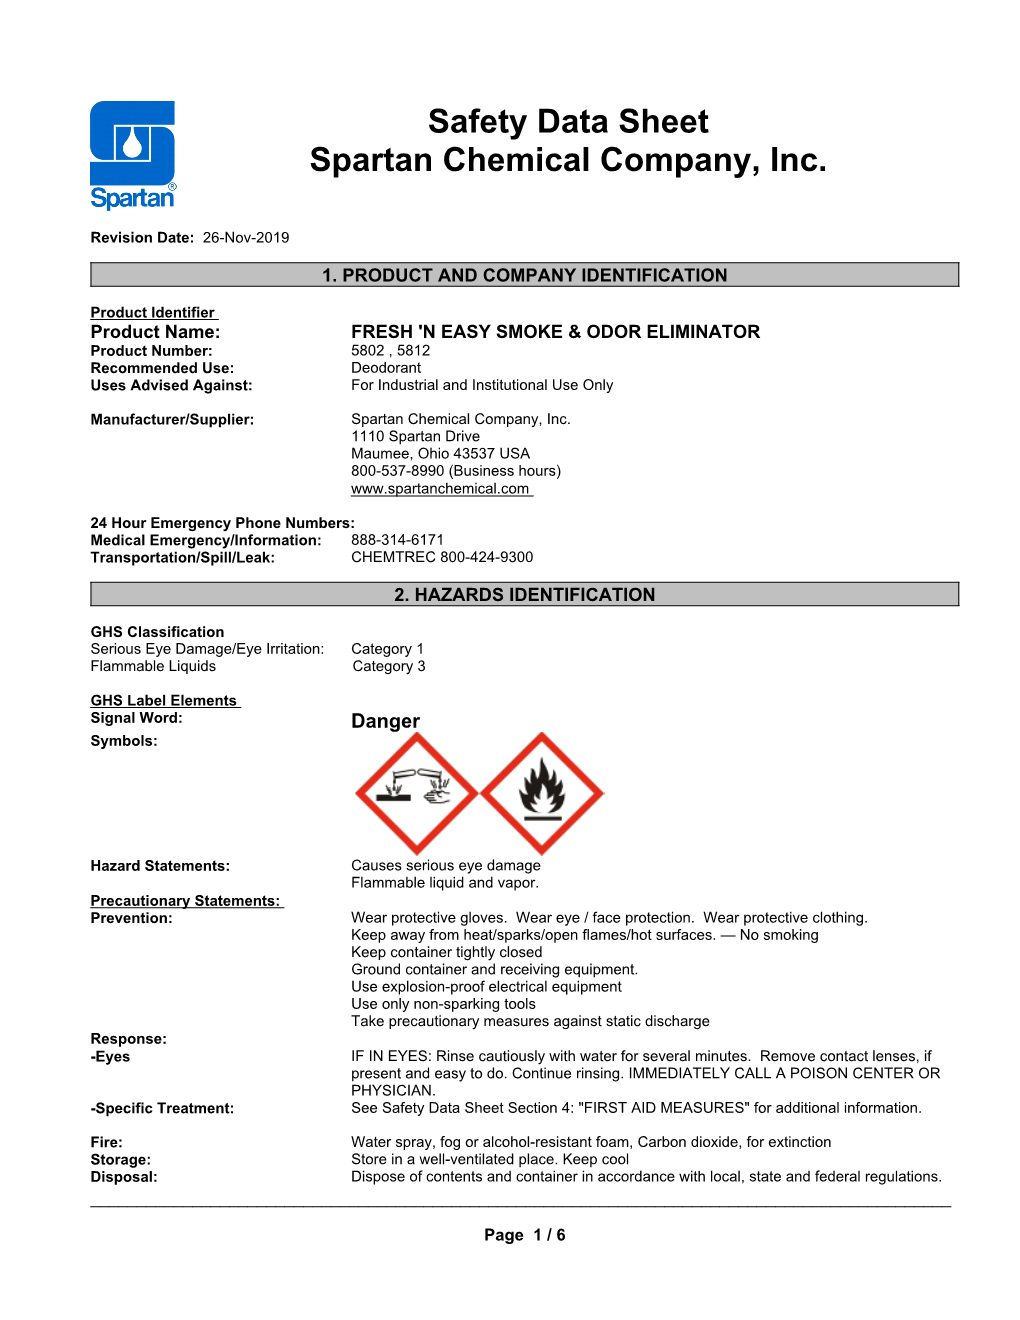 Safety Data Sheet Spartan Chemical Company, Inc